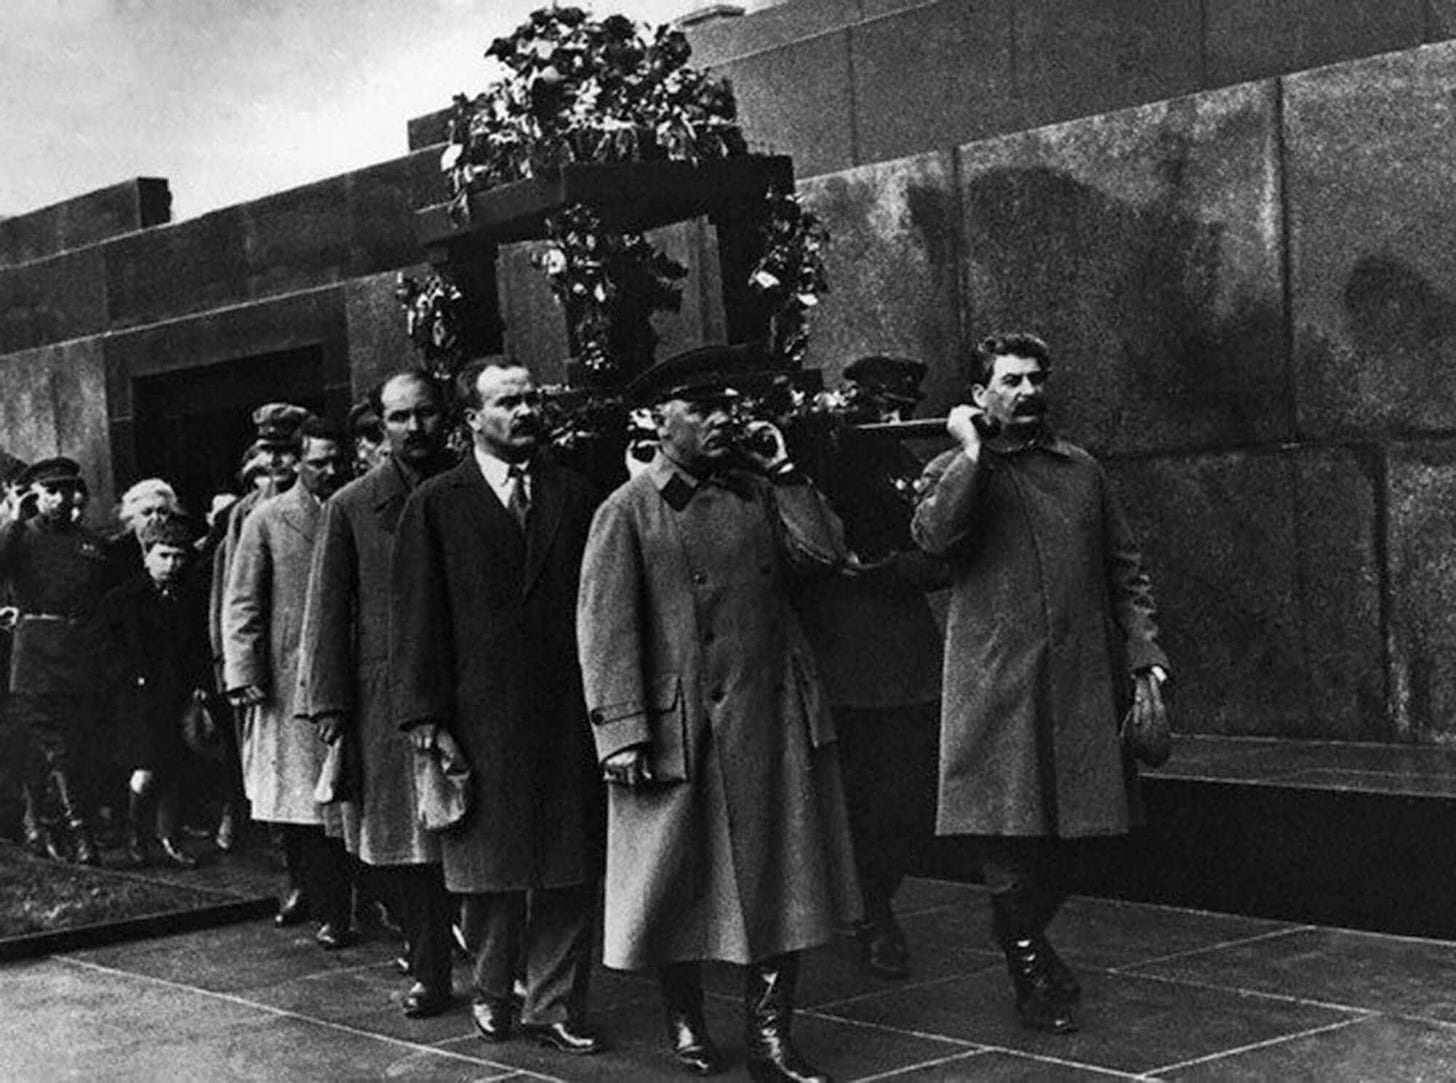 Vladimir Lenin's funeral procession with Joseph Stalin as the Chief Mourner  - January 1924 - Pravda [2000x1487] : r/HistoryPorn